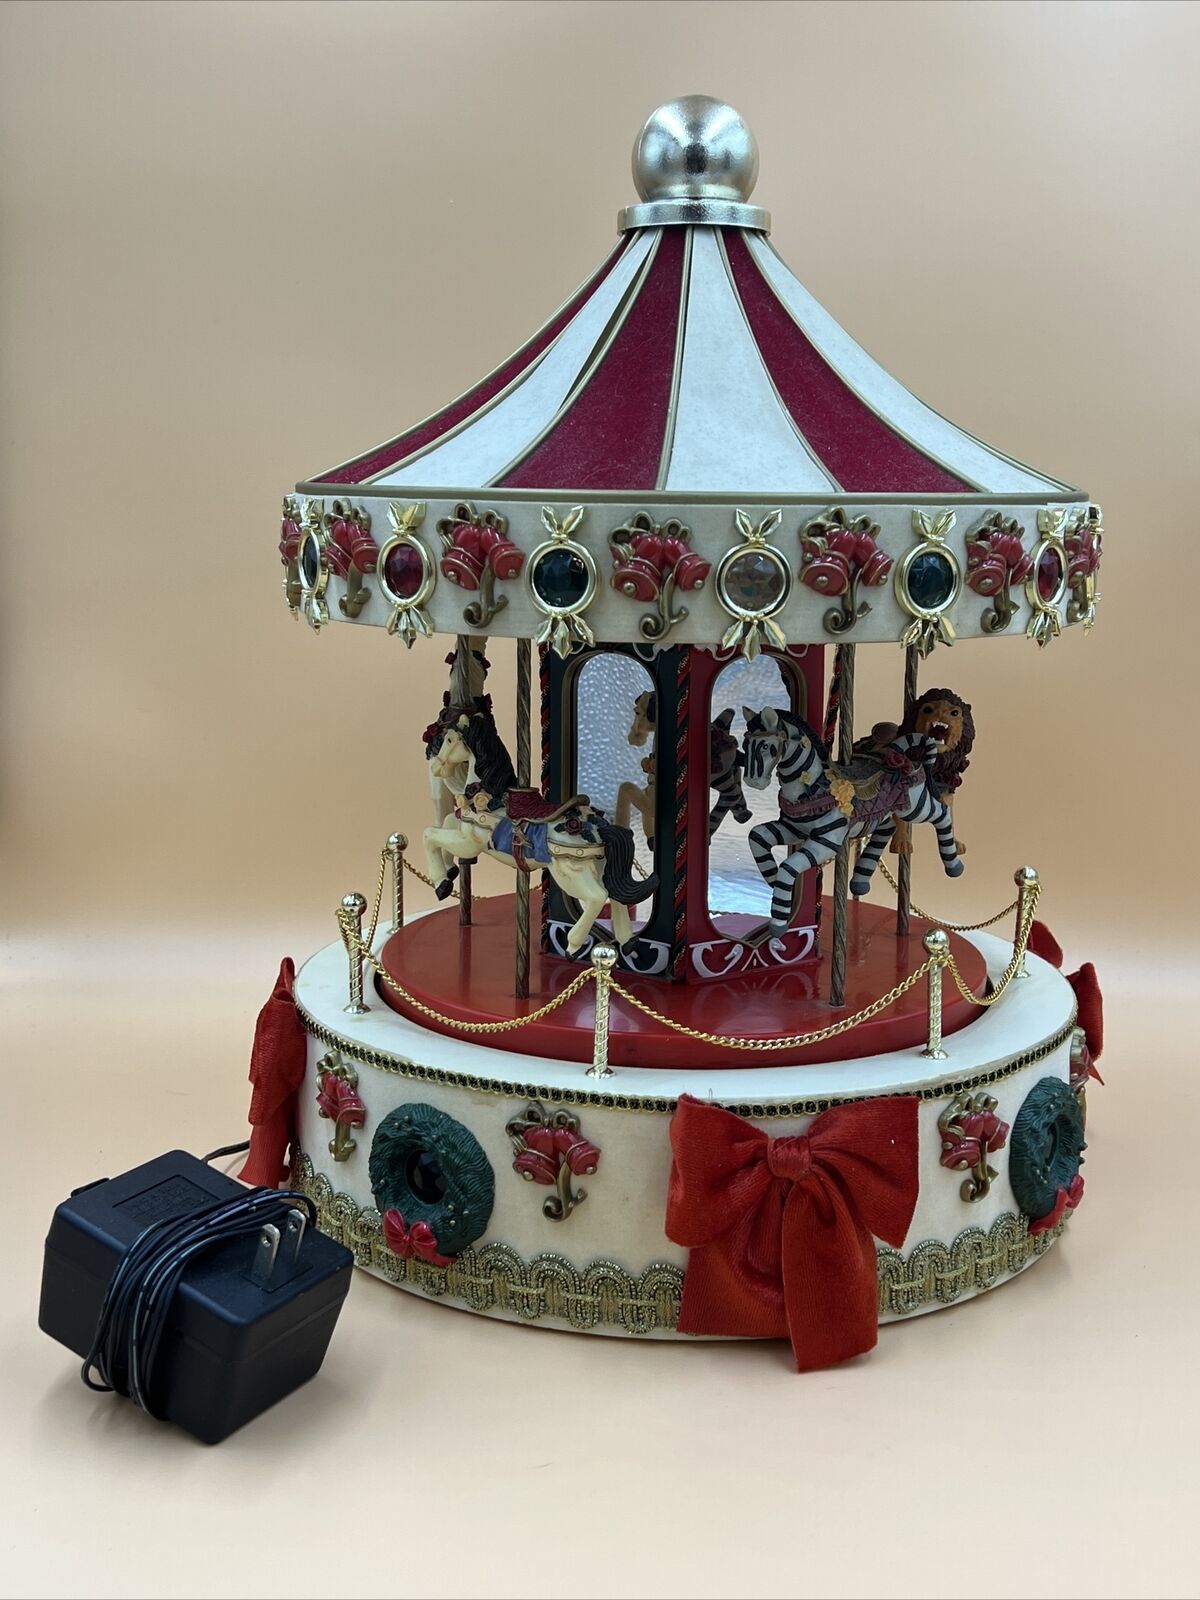 16” Christmas Carousel Musical Animated Lighted Merry Go Round Holiday Workshop